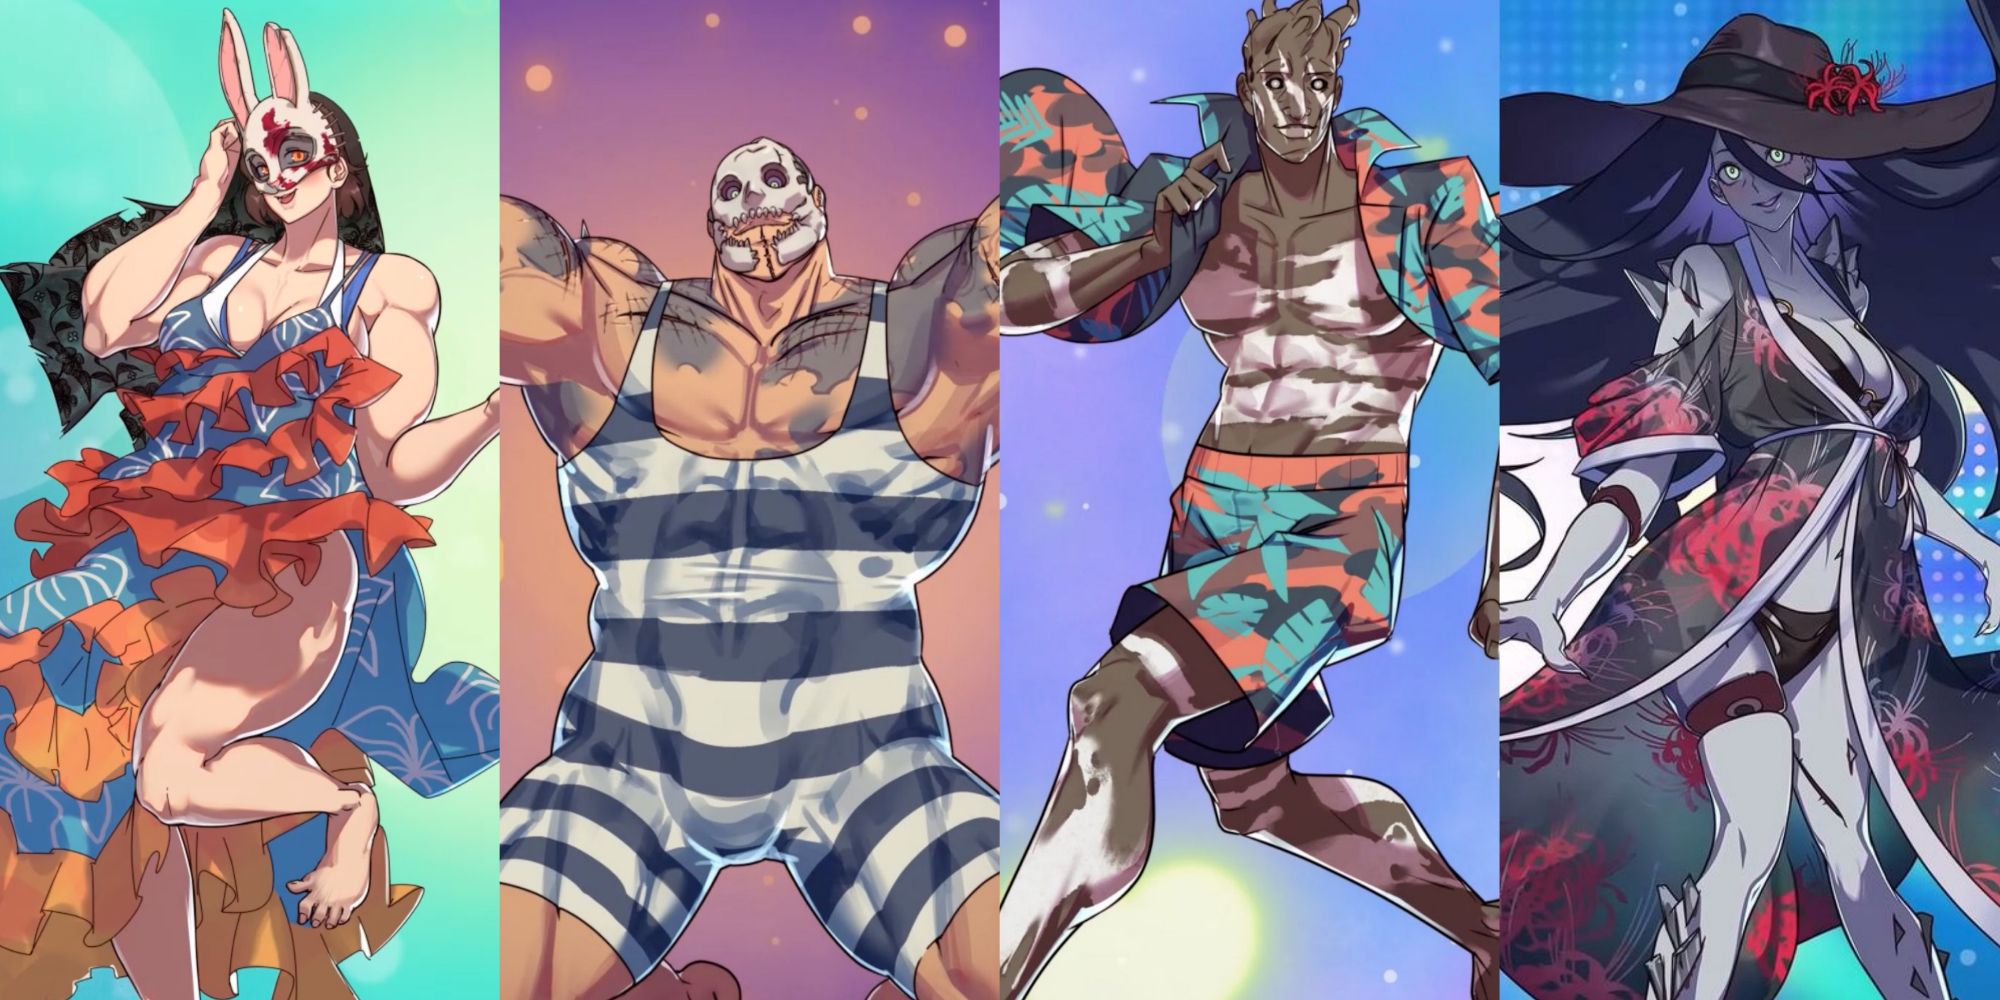 Huntress, Trapper, Wraith and Spirit in their Hooked On You versions, wearing bathing suits